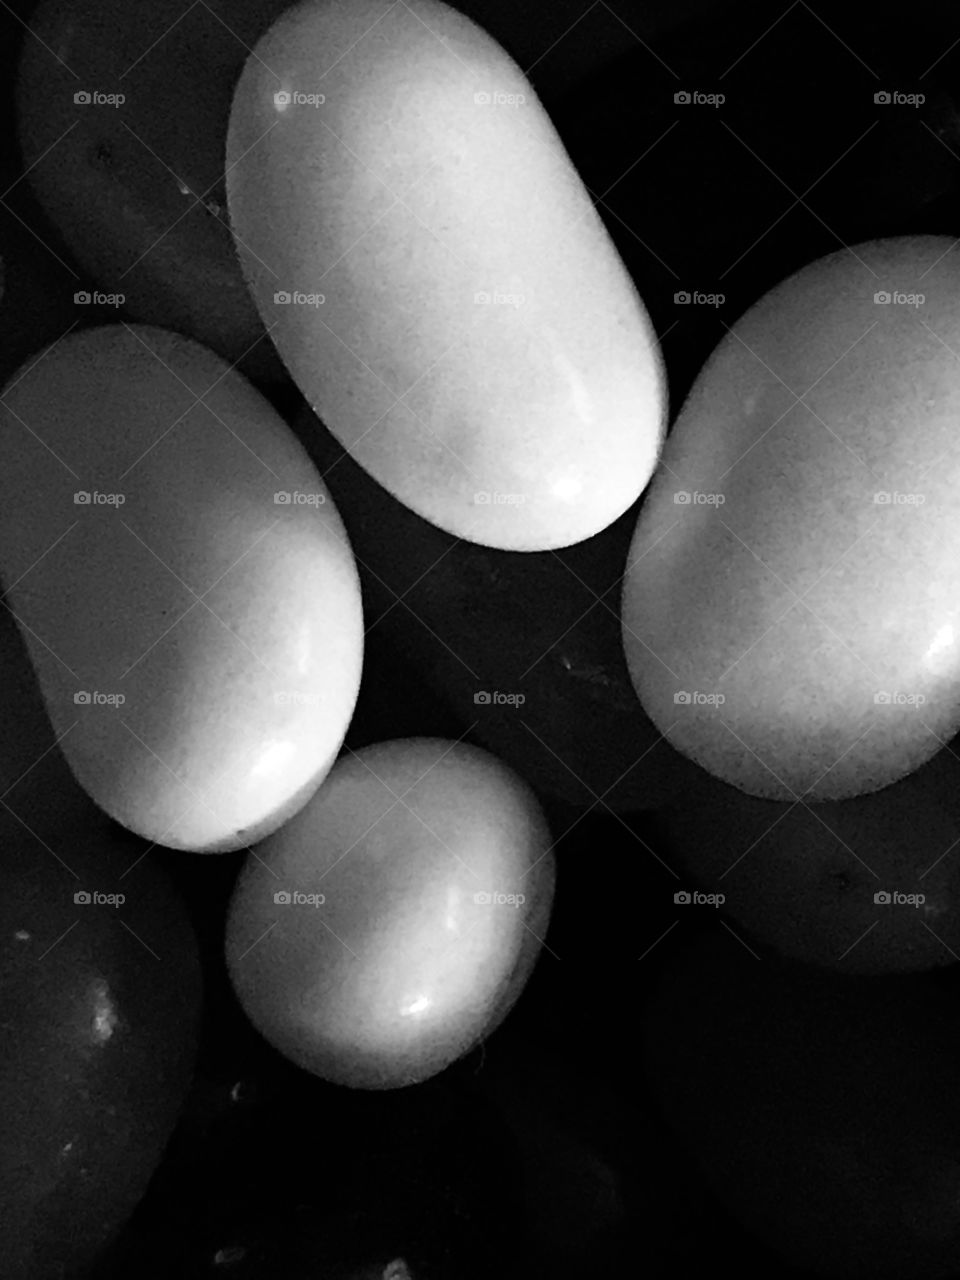 A monochromatic picture of jellybeans with the exposure adjusted so just the four white jellybeans are visible creating interesting shadows and making the beans resemble pearly-white, rounded stones. 